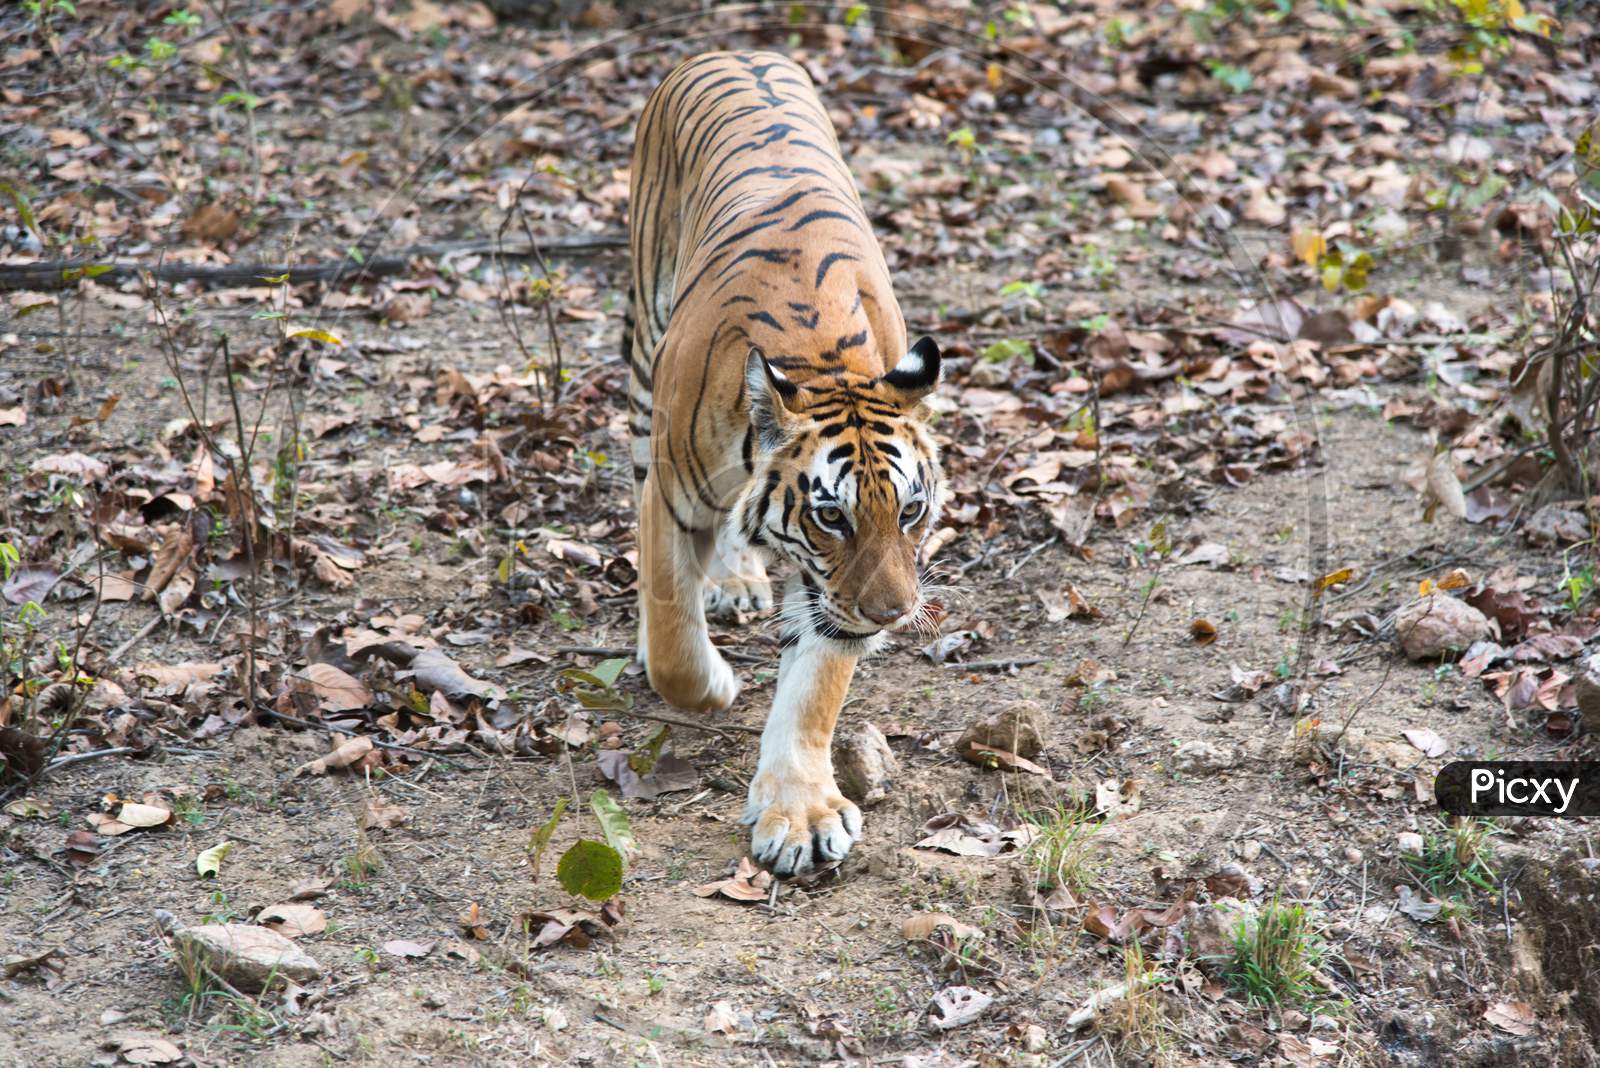 A female Royal Bengal tiger in the jungle.